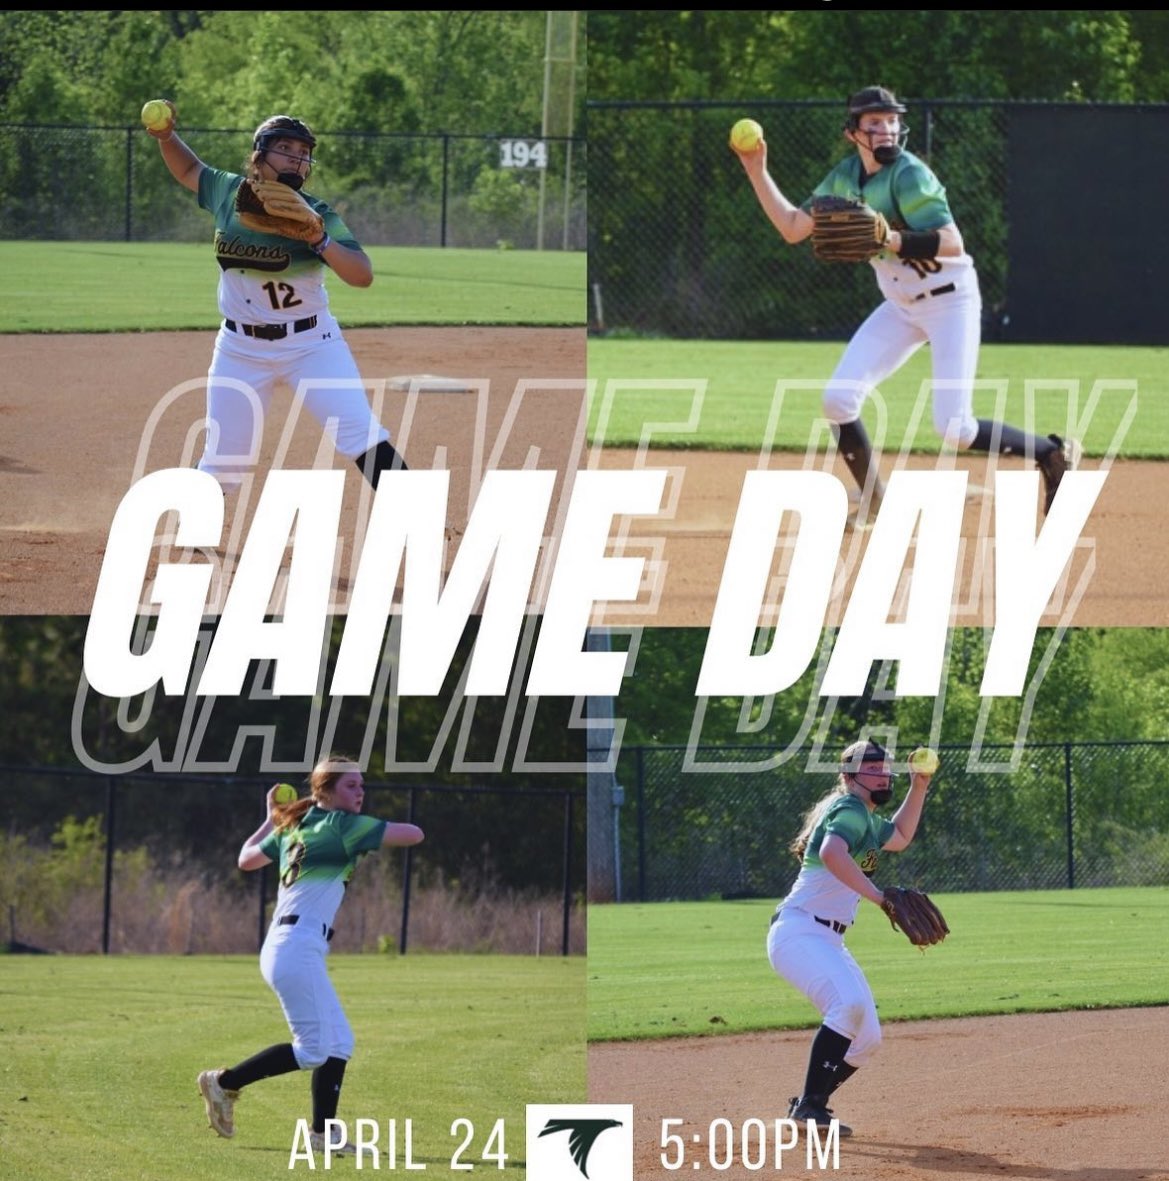 TODAY is the last game before the Area Tournament! Come support the JP2 Softball Team on this away game vs Columbia. Go Falcons!🥎 Game starts at 5:00pm.